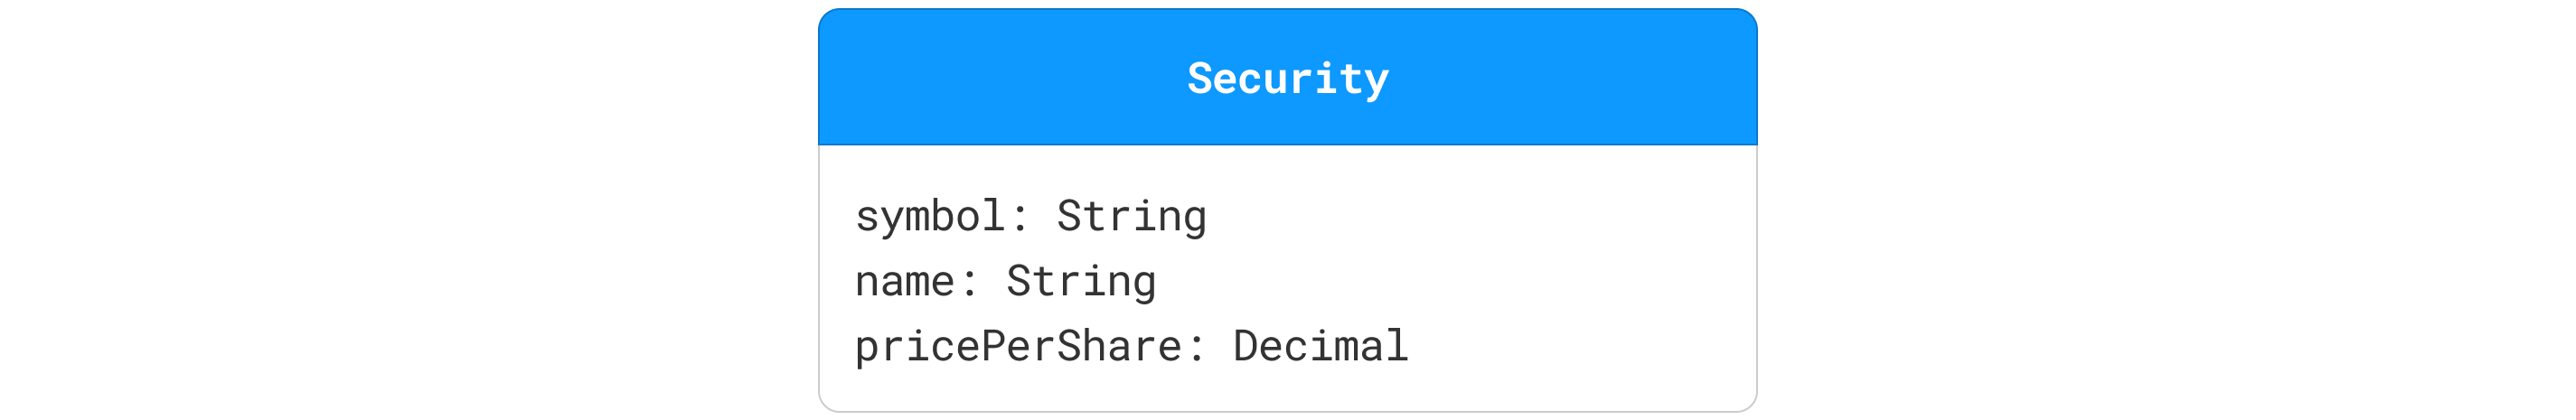 Security with price